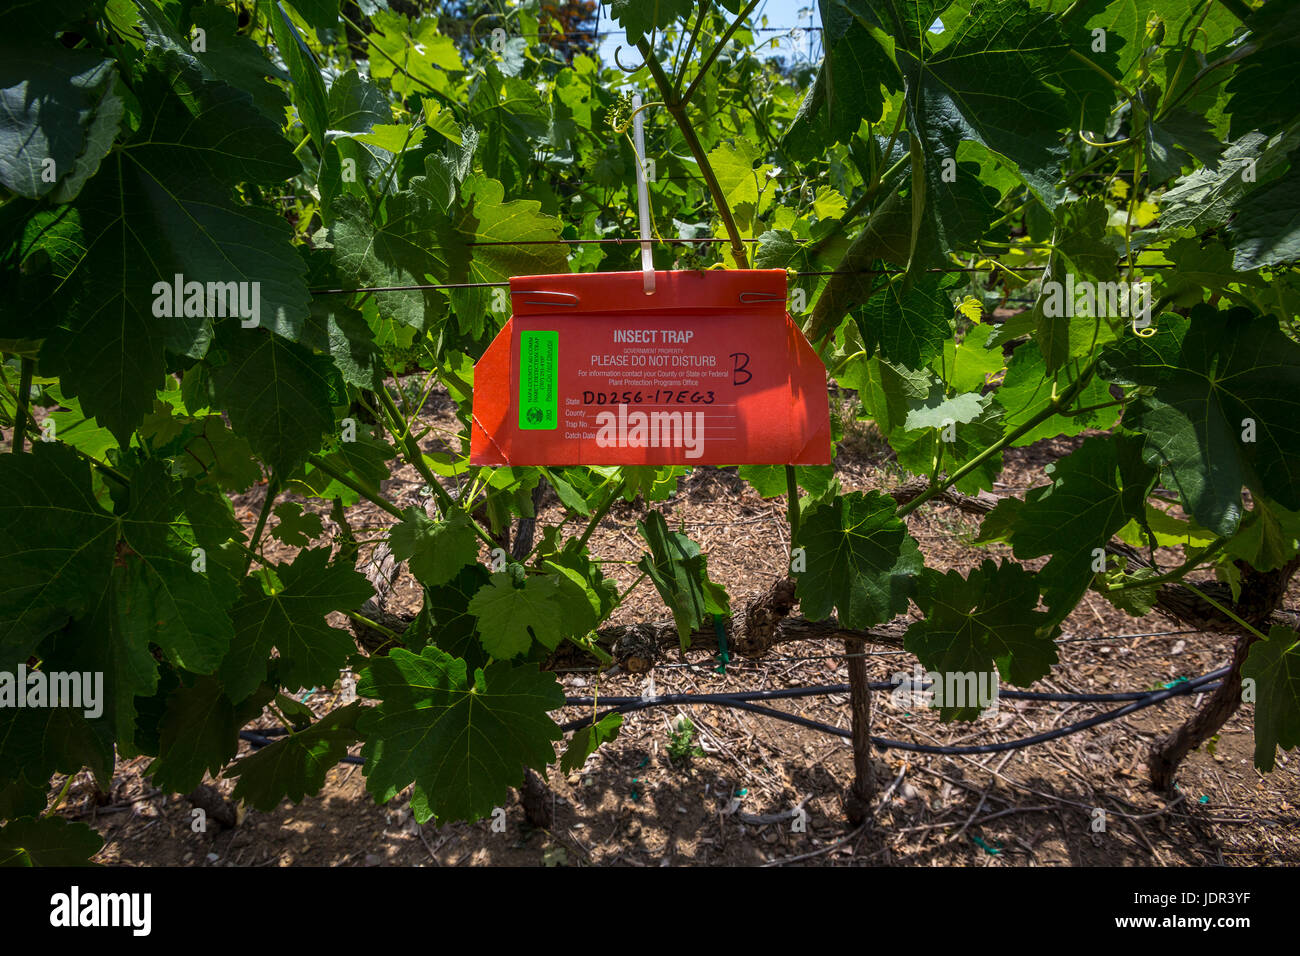 insect trap, insect detection trap, grape vineyard, vineyard, vineyards, Fortunati Vineyards, Napa, Napa Valley, California, United States Stock Photo